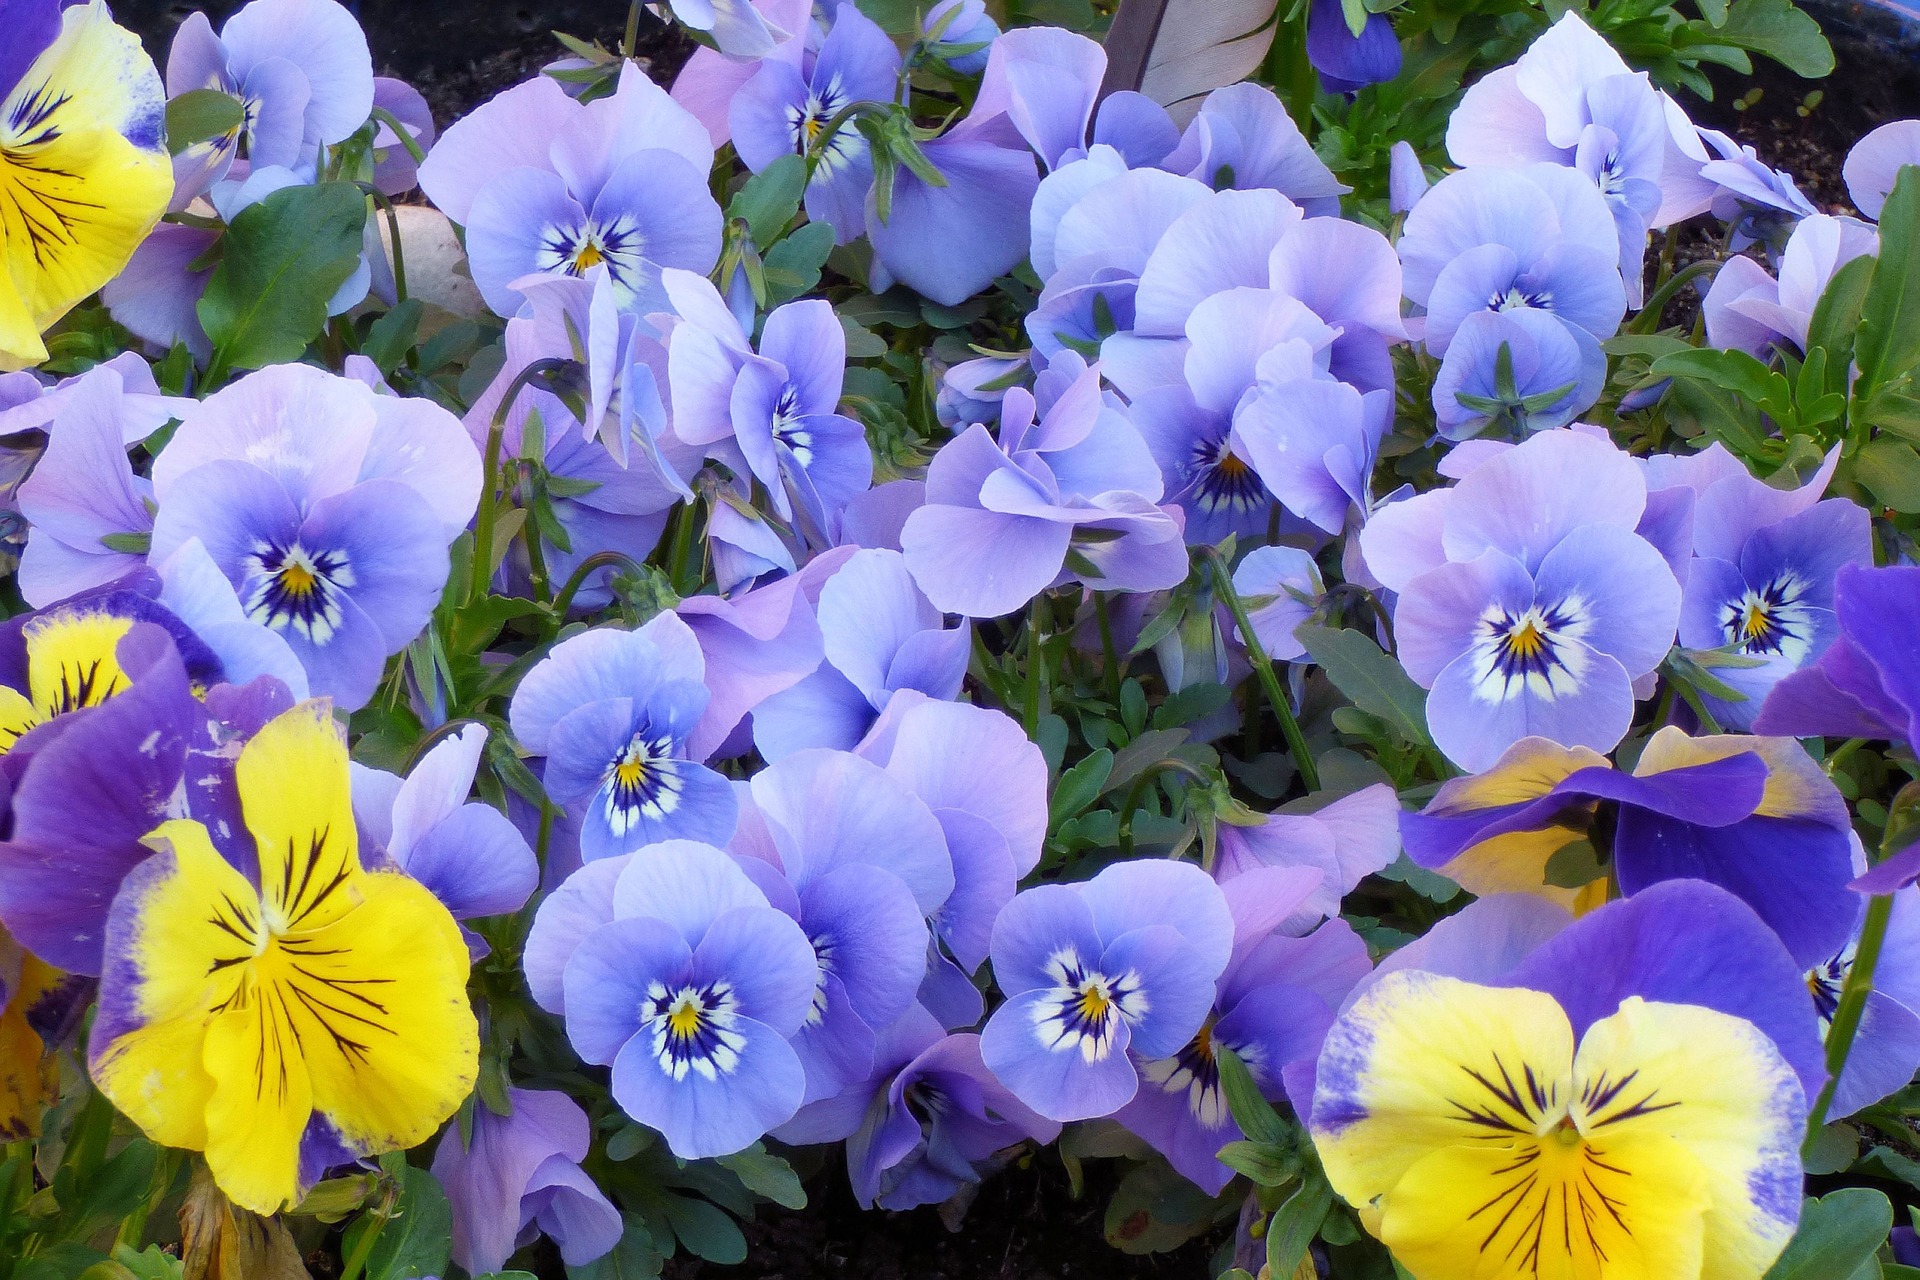 A photo of spring flowers